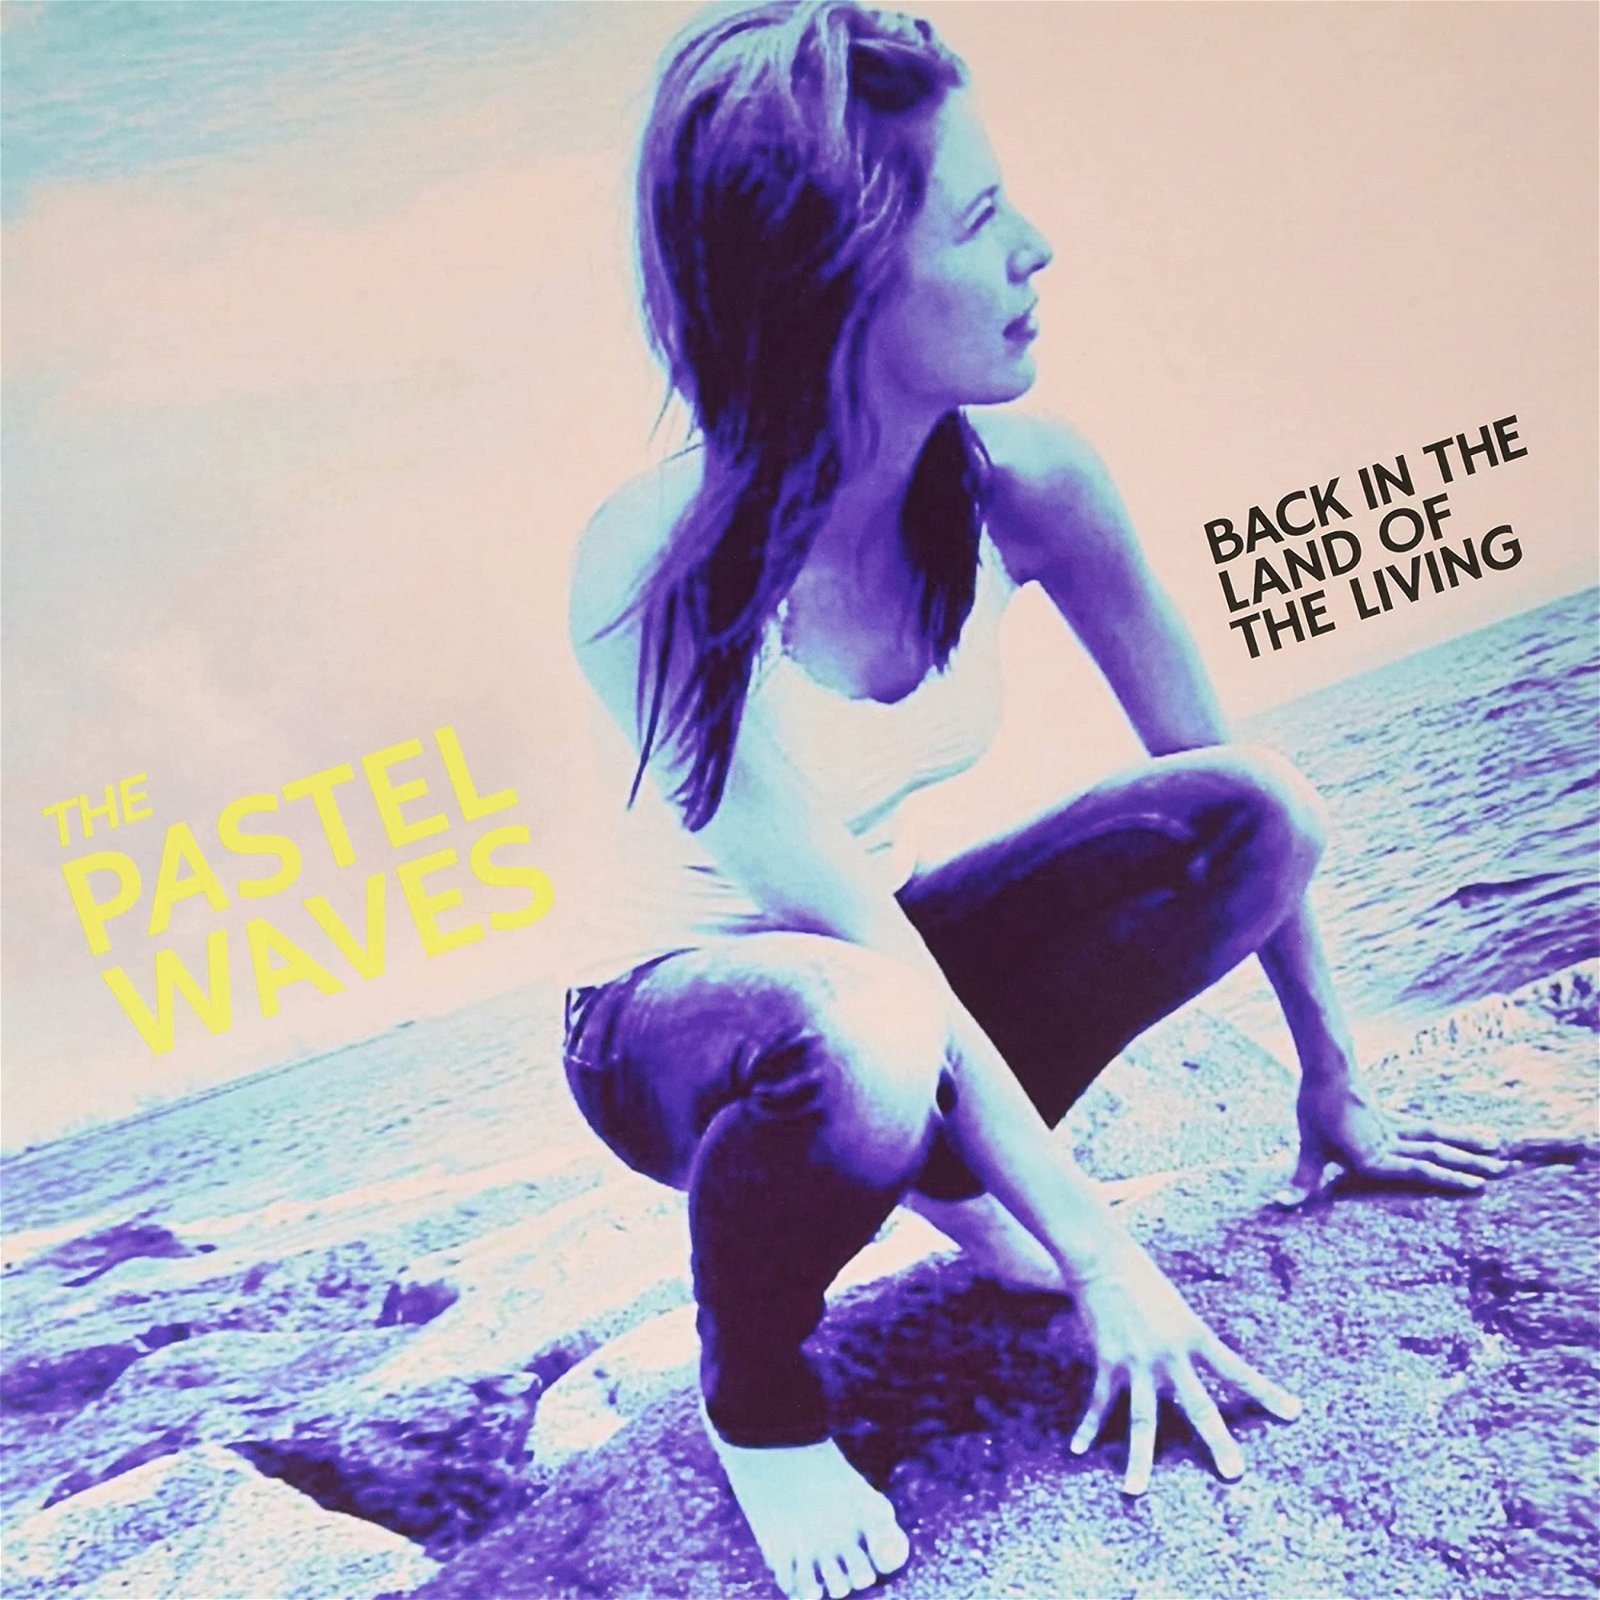 CD Shop - PASTEL WAVES BACK IN THE LAND OF THE LIVING